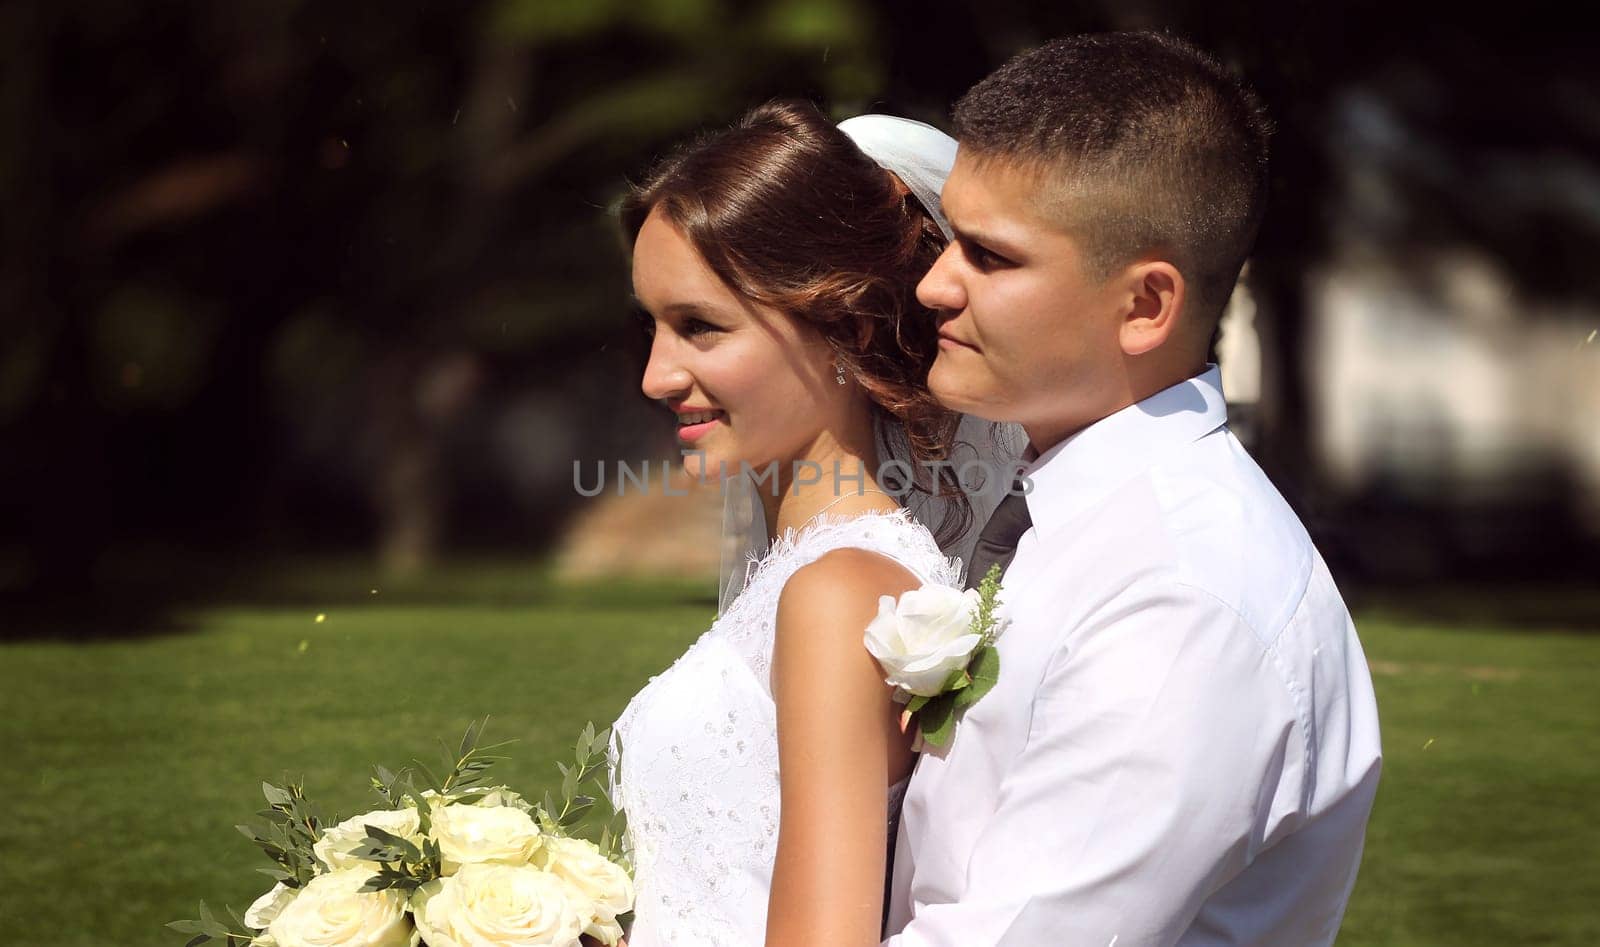 Happy groom hugging his bride holding a bouquet of white roses in her hands. High quality photo